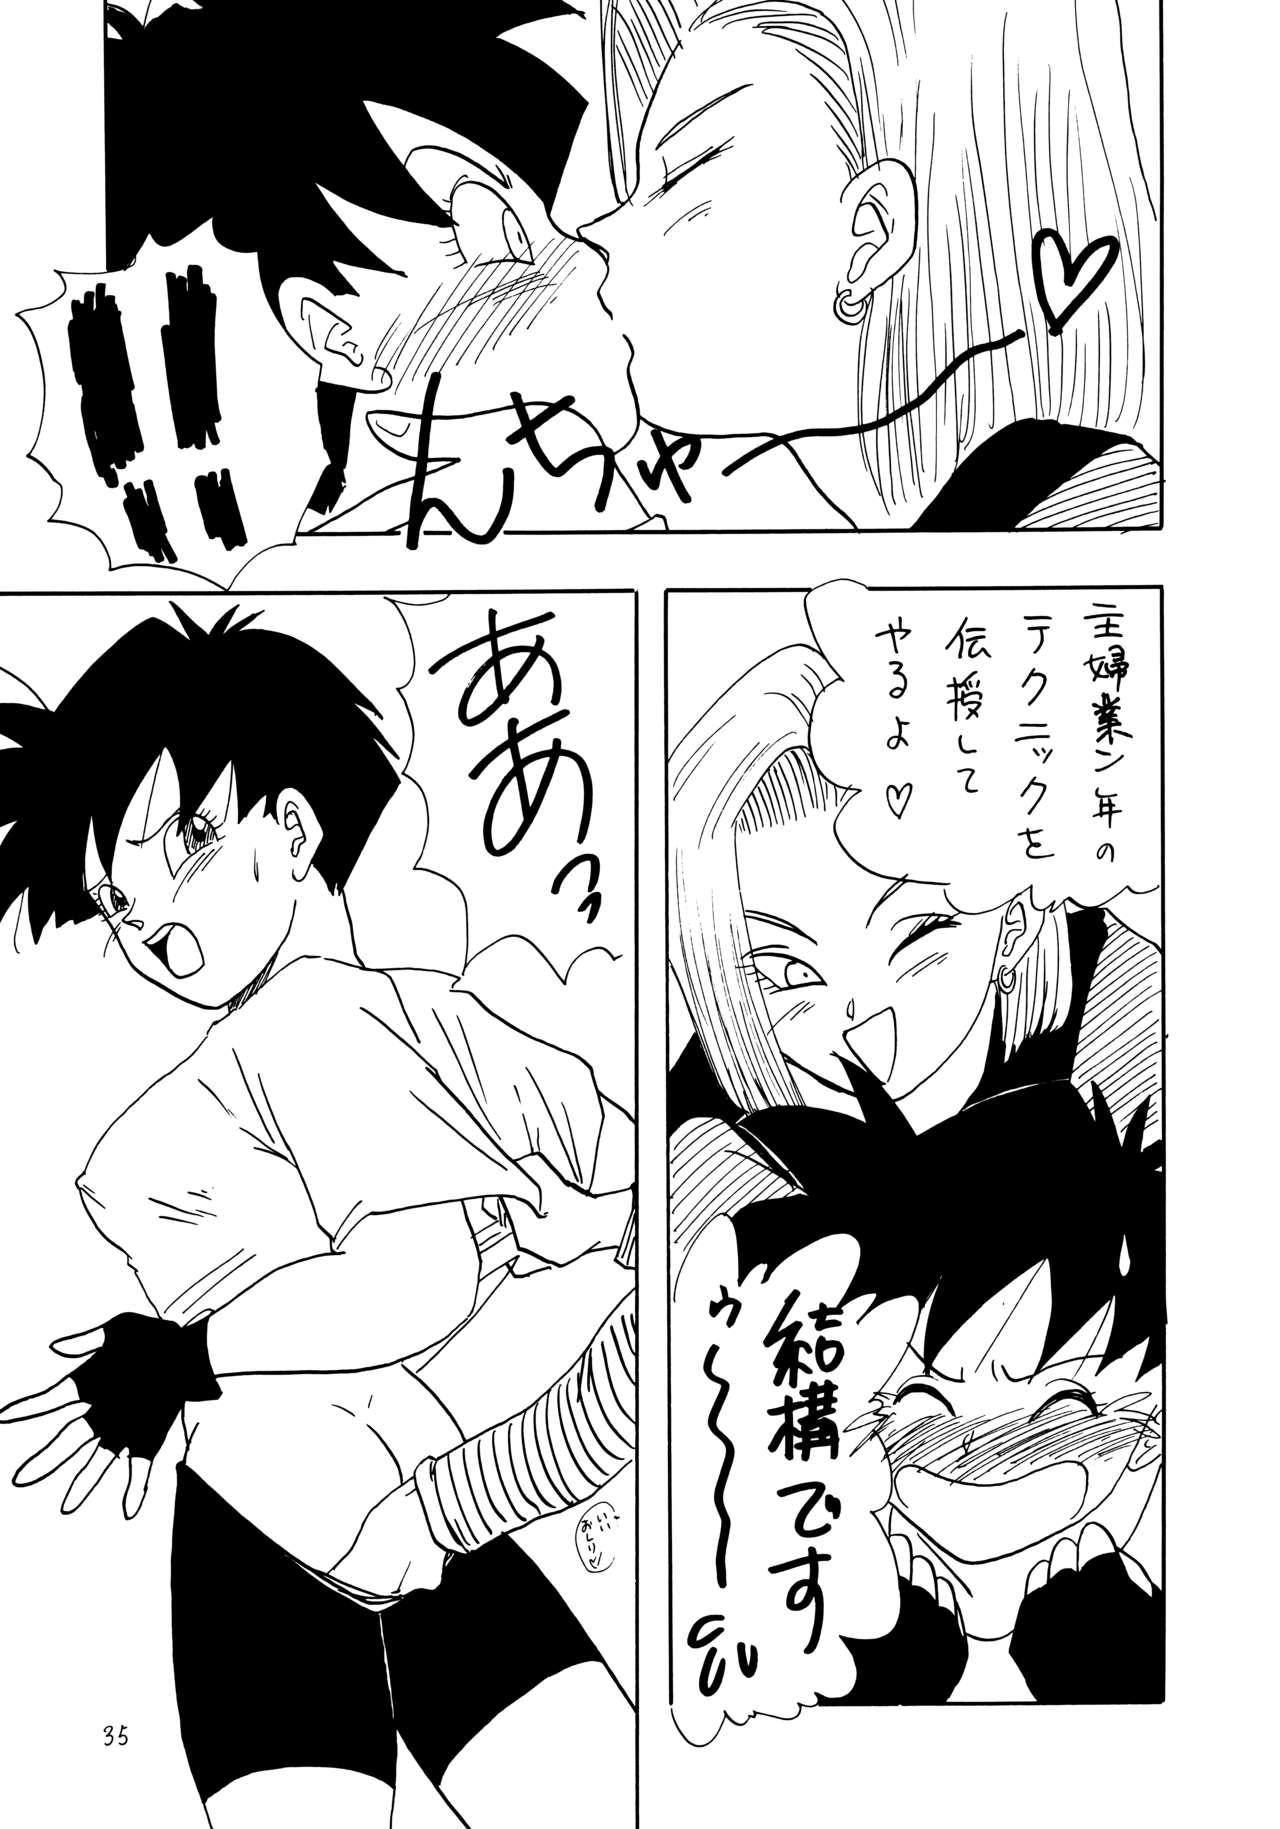 Y Page 35 Of 51 dragon ball z hentai comic, Y Page 35 Of 51 dragon ball z.....